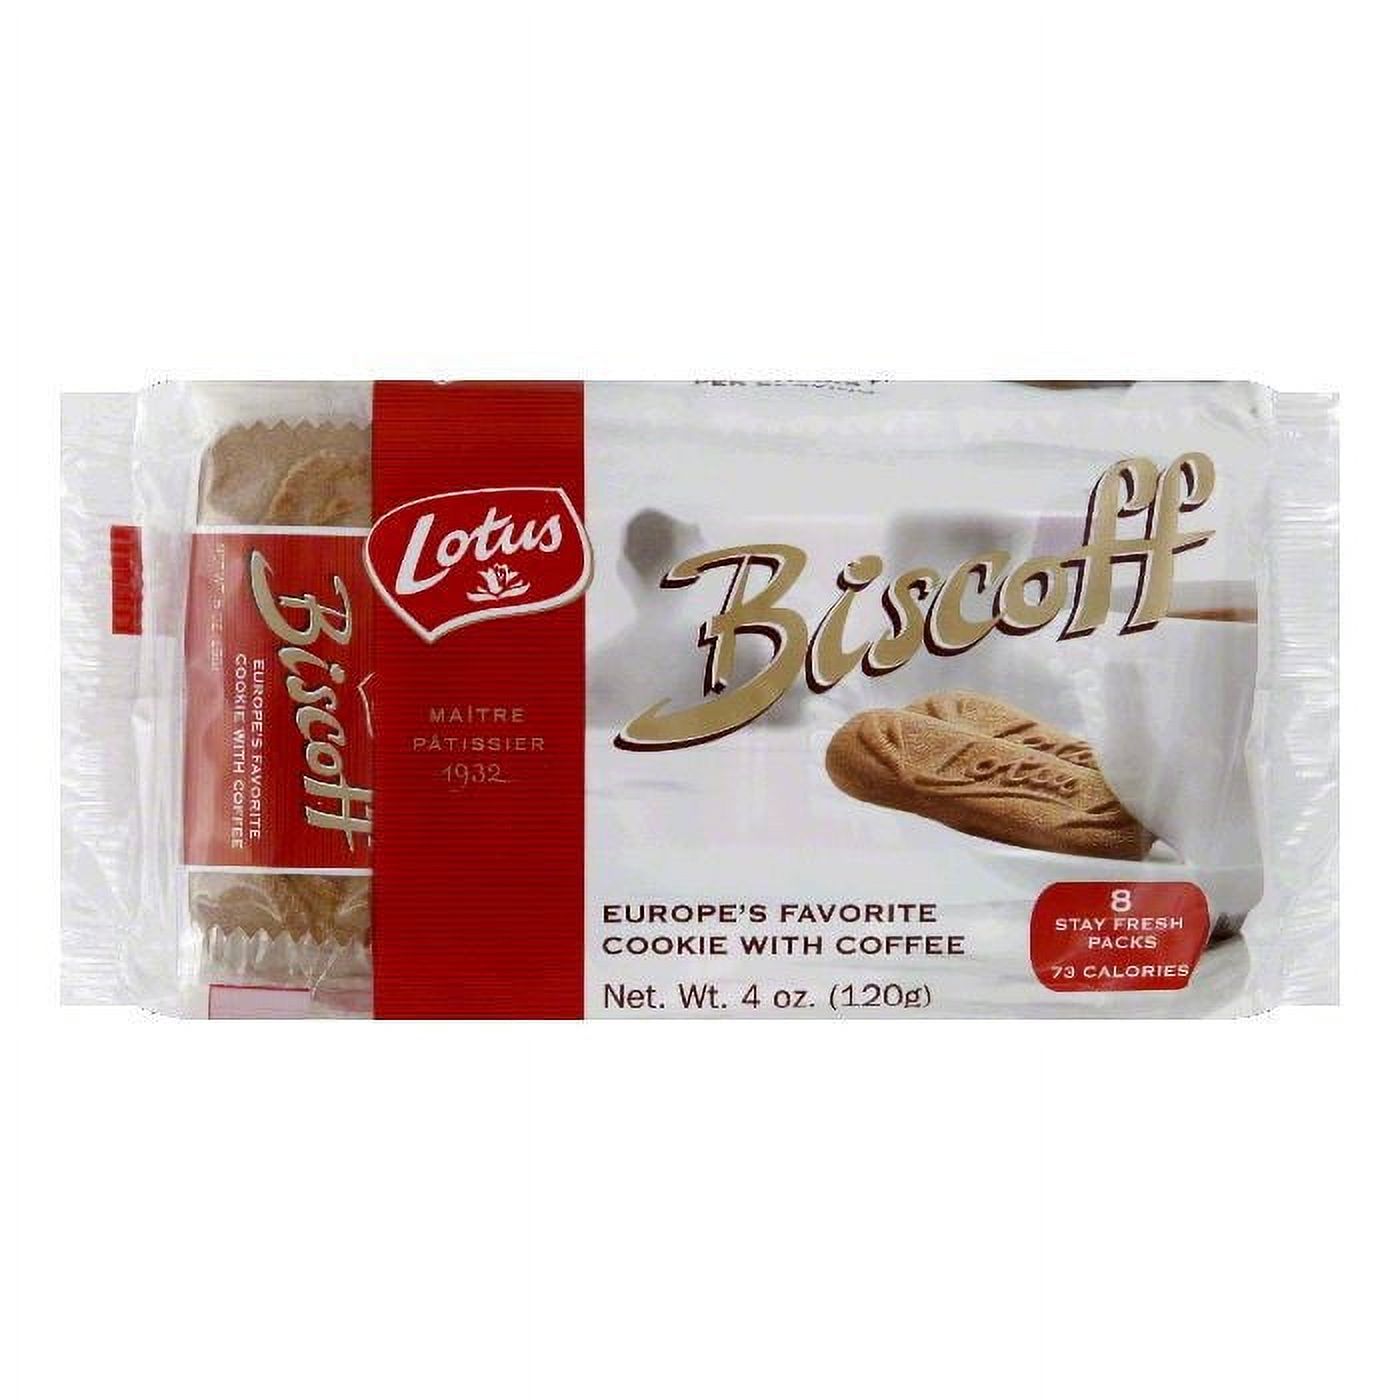 Lotus Biscoff Europe's Favorite Cookie with Coffee, 4 Oz. - image 1 of 3